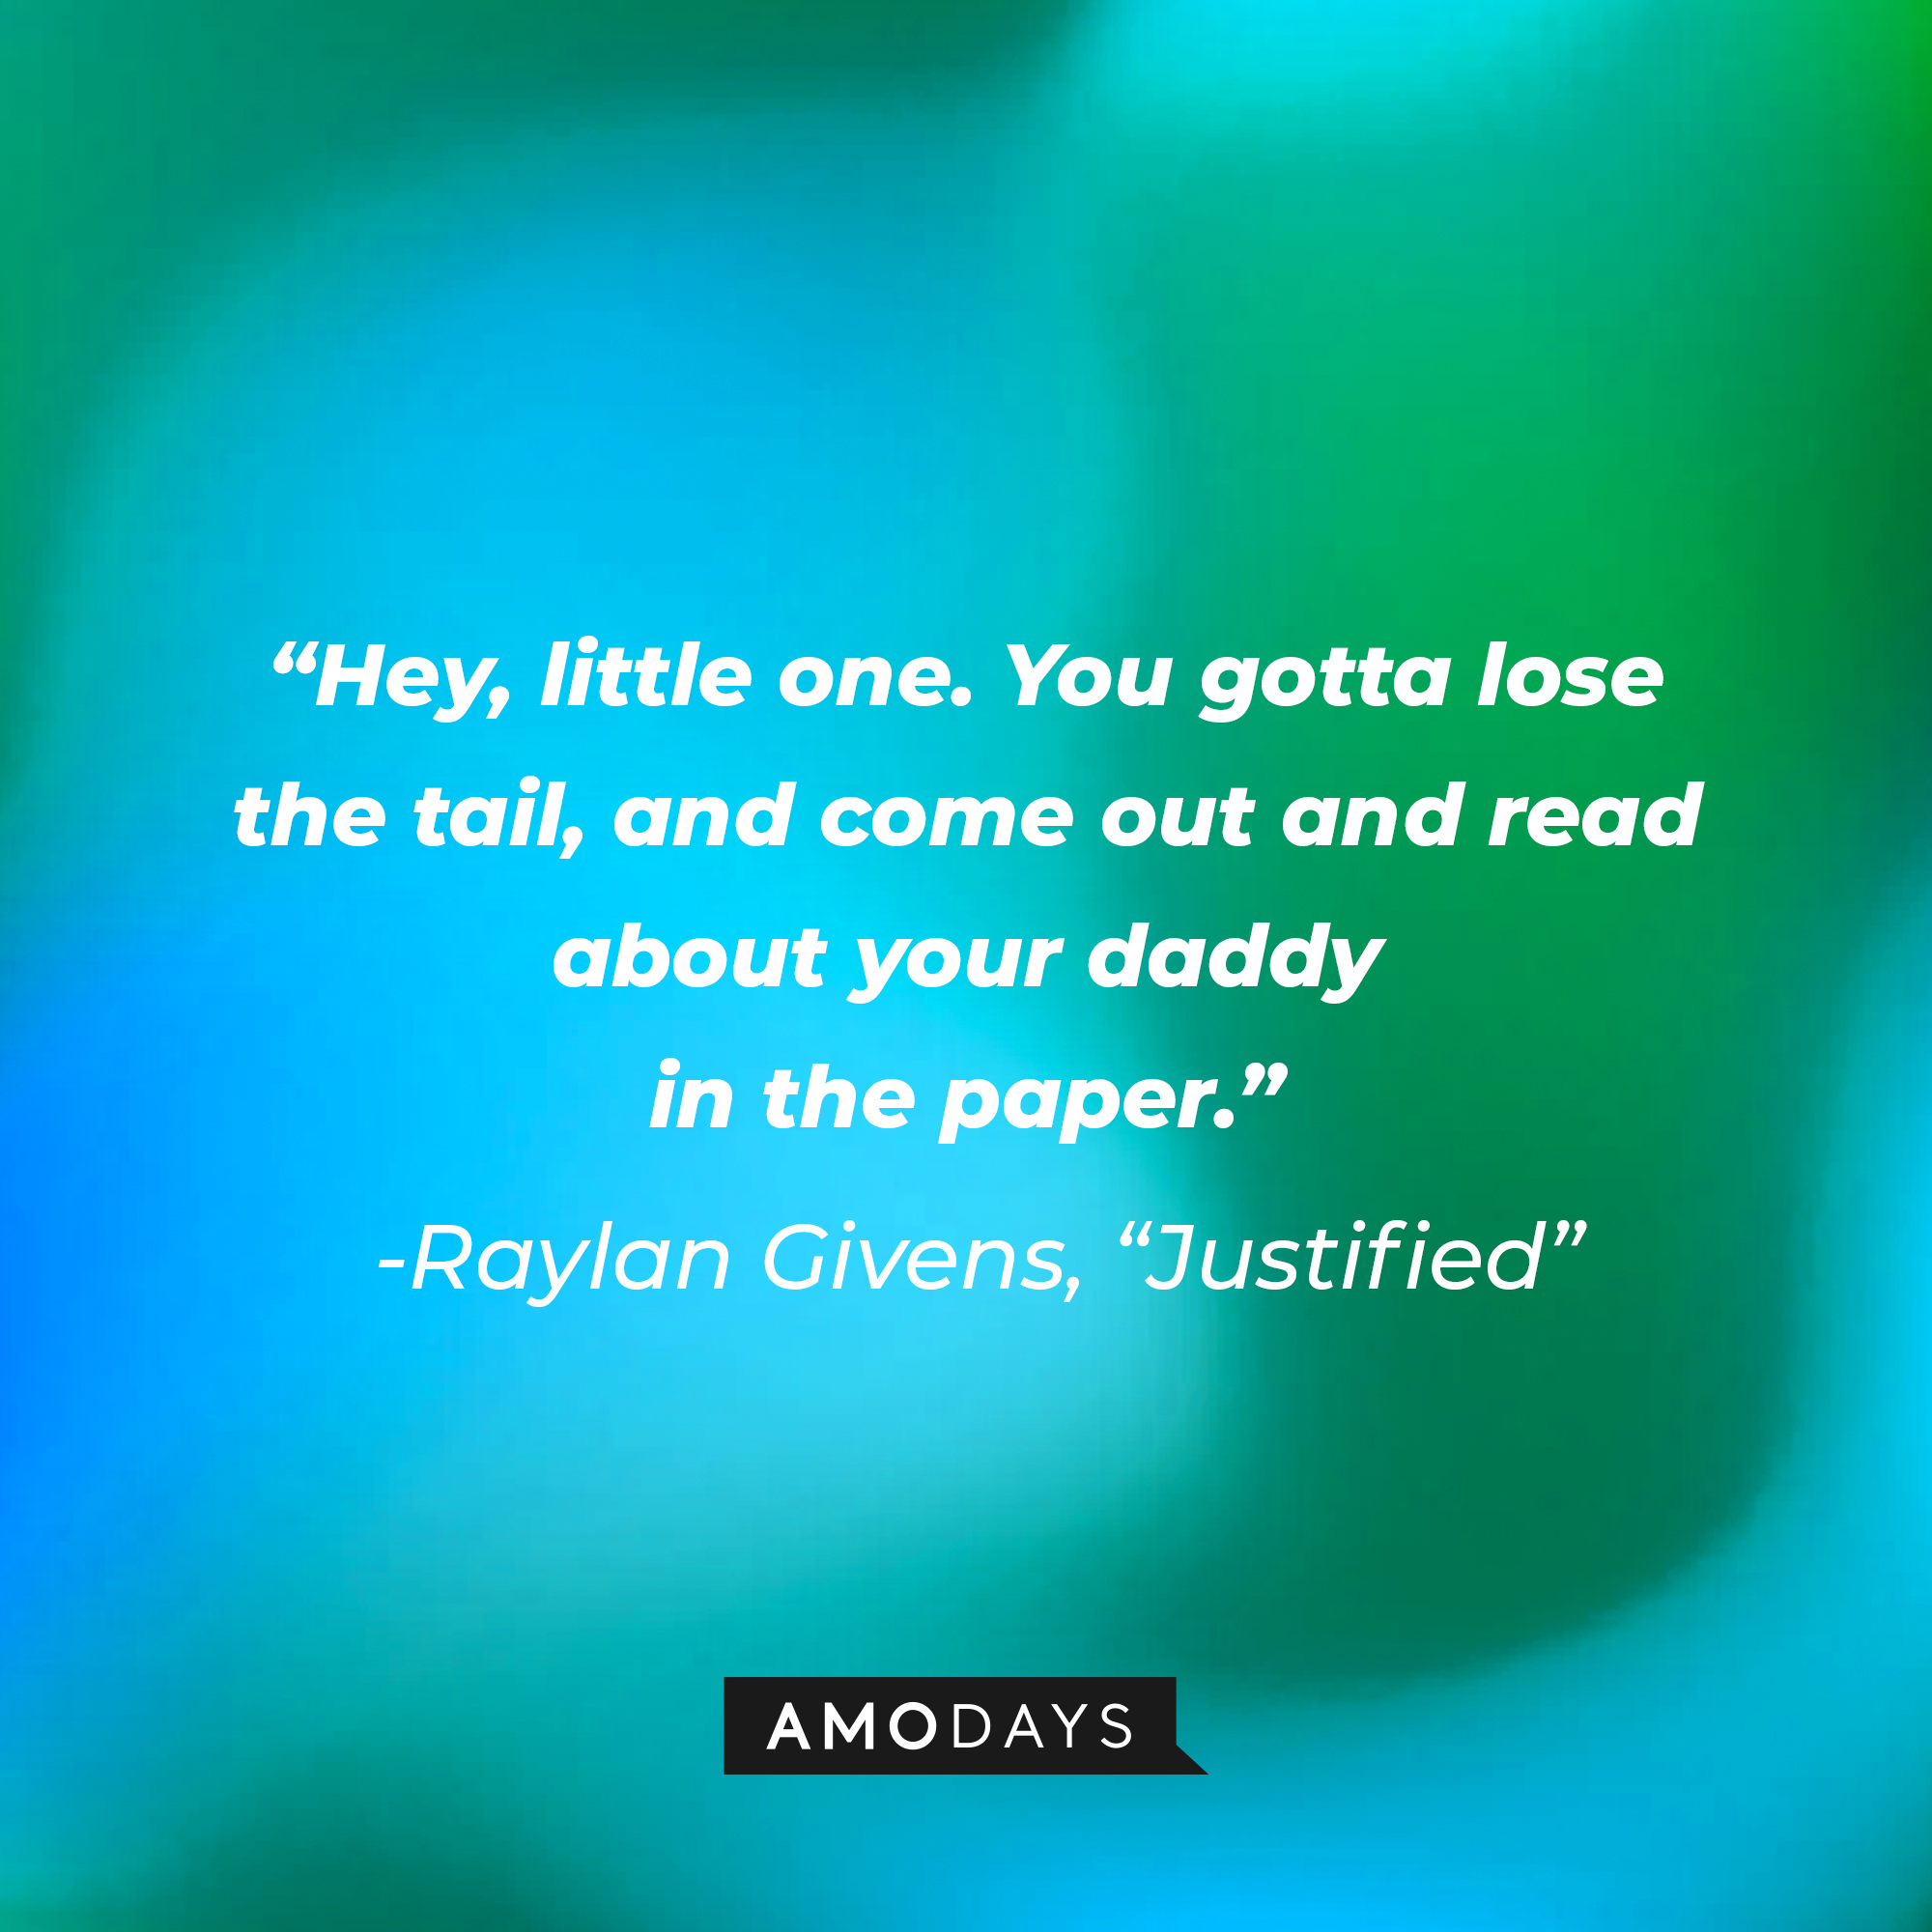 Raylan Givens’ quote from “Justified”: “Hey, little one. You gotta lose the tail, and come out and read about your daddy in the paper.” | Source: AmoDays